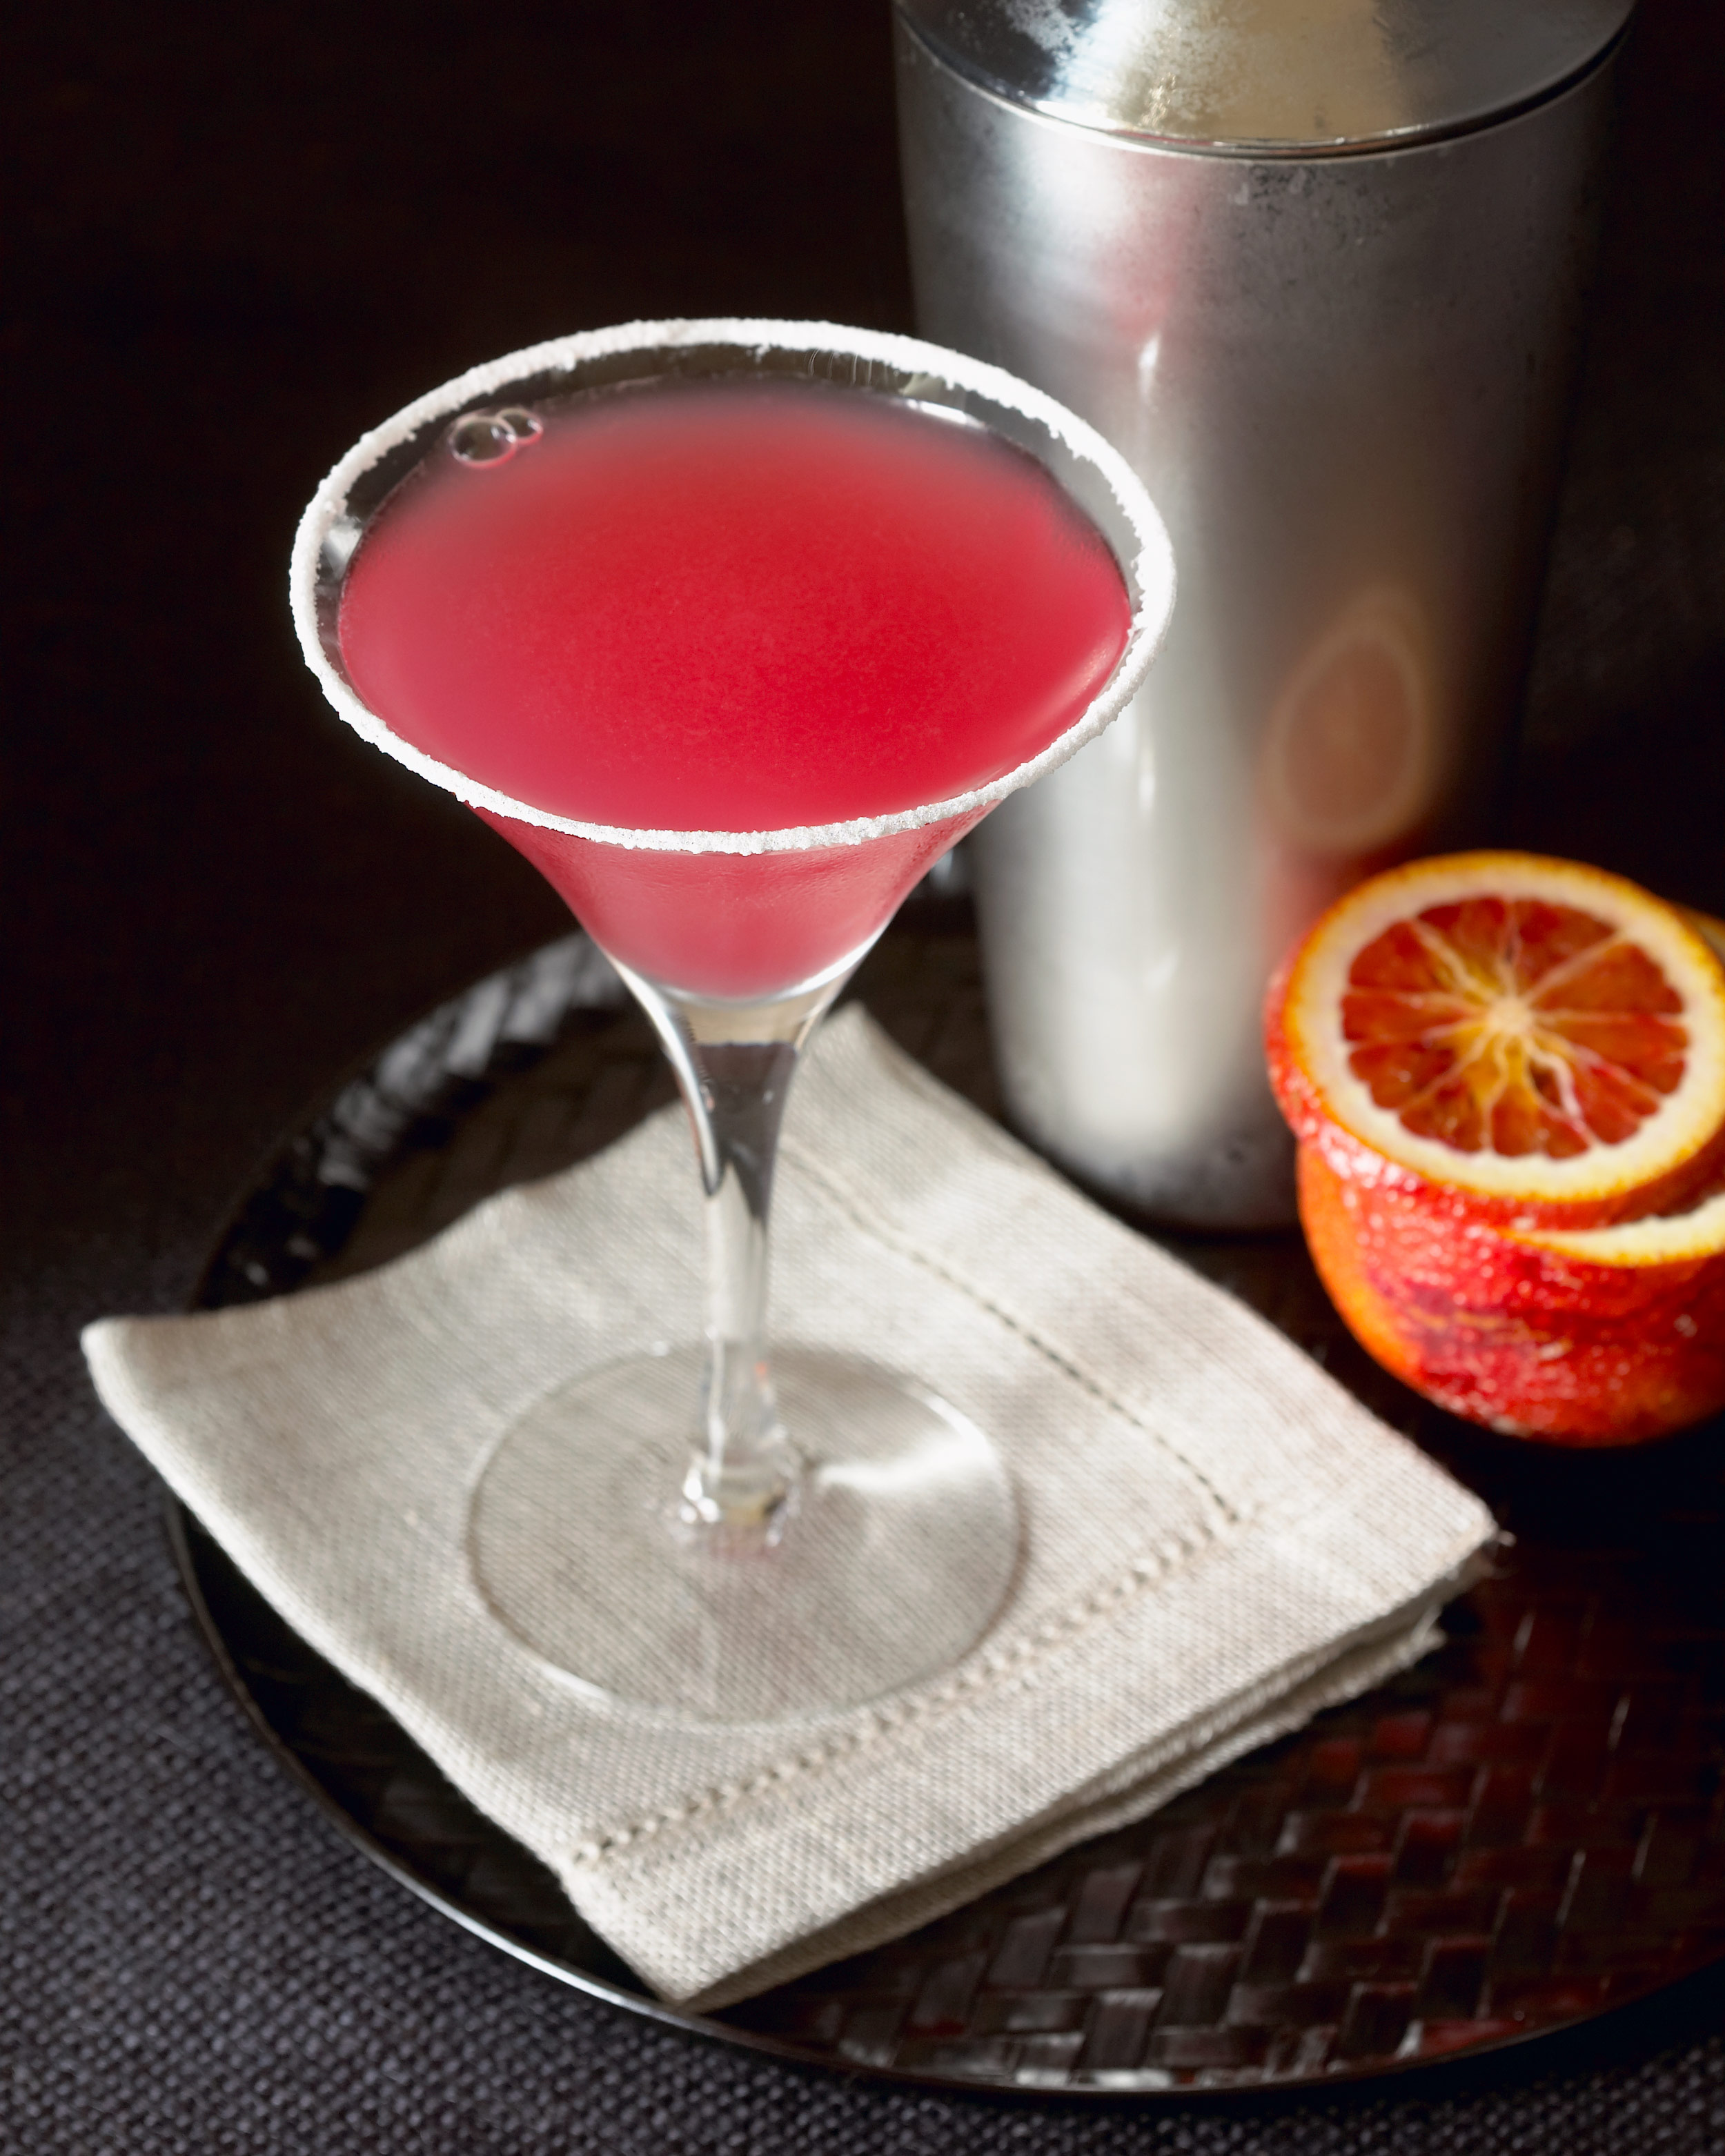 Annabelle_Breakey_Beverage_Photographer_Food_Photography_citrus_kiss_cocktail